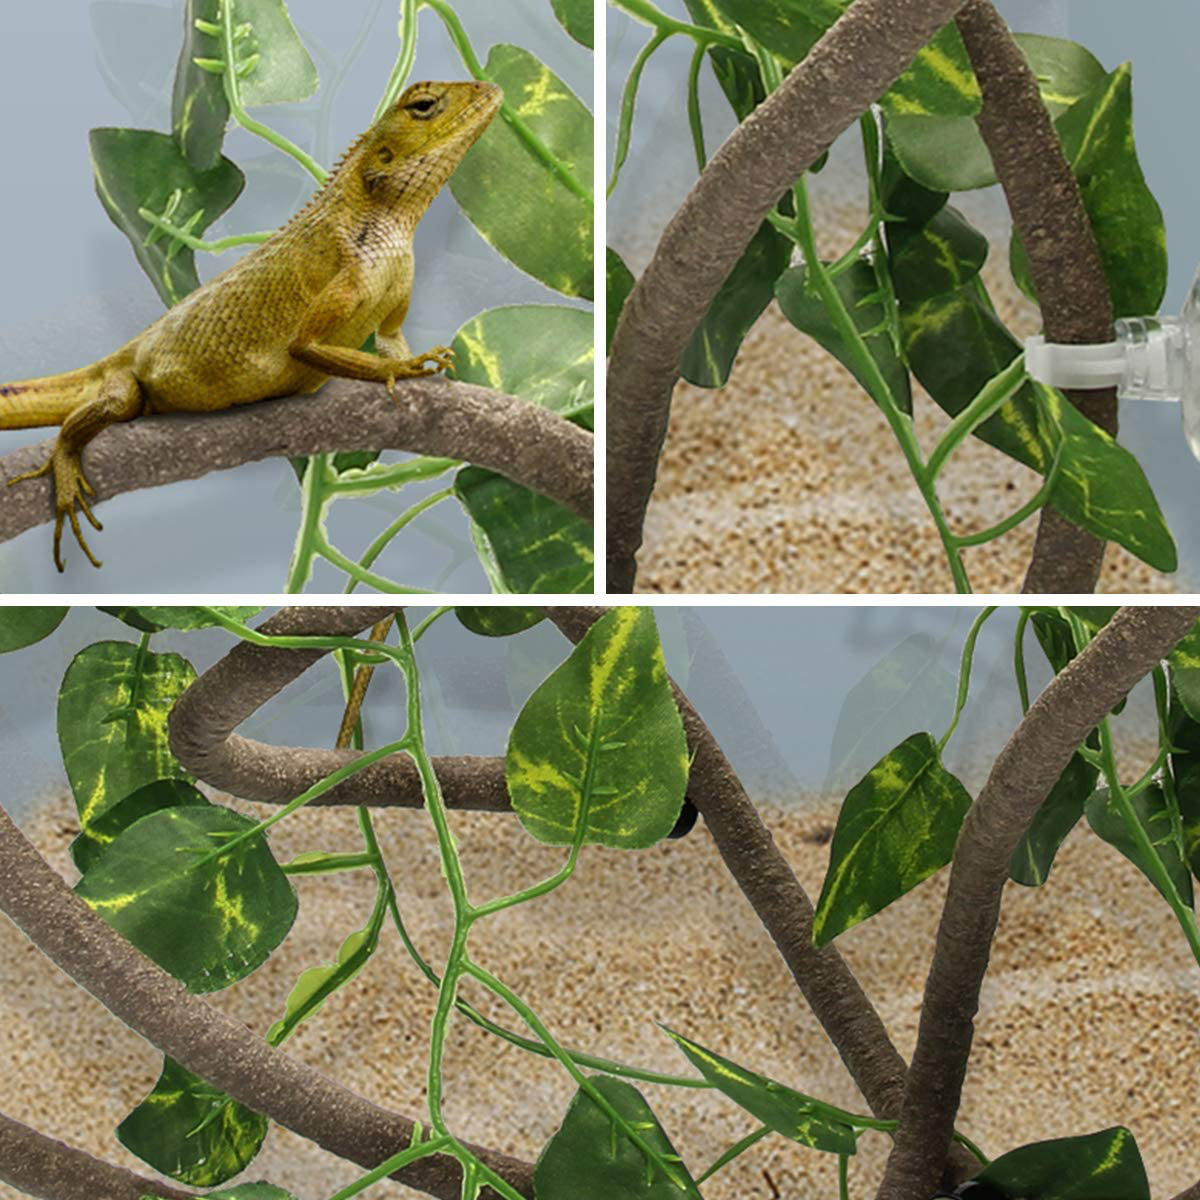 Coolrunner 8FT Reptile Vines and Flexible Reptile Leaves with Suction Cups Jungle Climber Long Vines Habitat Decor for Climbing, Chameleon, Lizards, Gecko Animals & Pet Supplies > Pet Supplies > Reptile & Amphibian Supplies > Reptile & Amphibian Substrates Coolrunner   